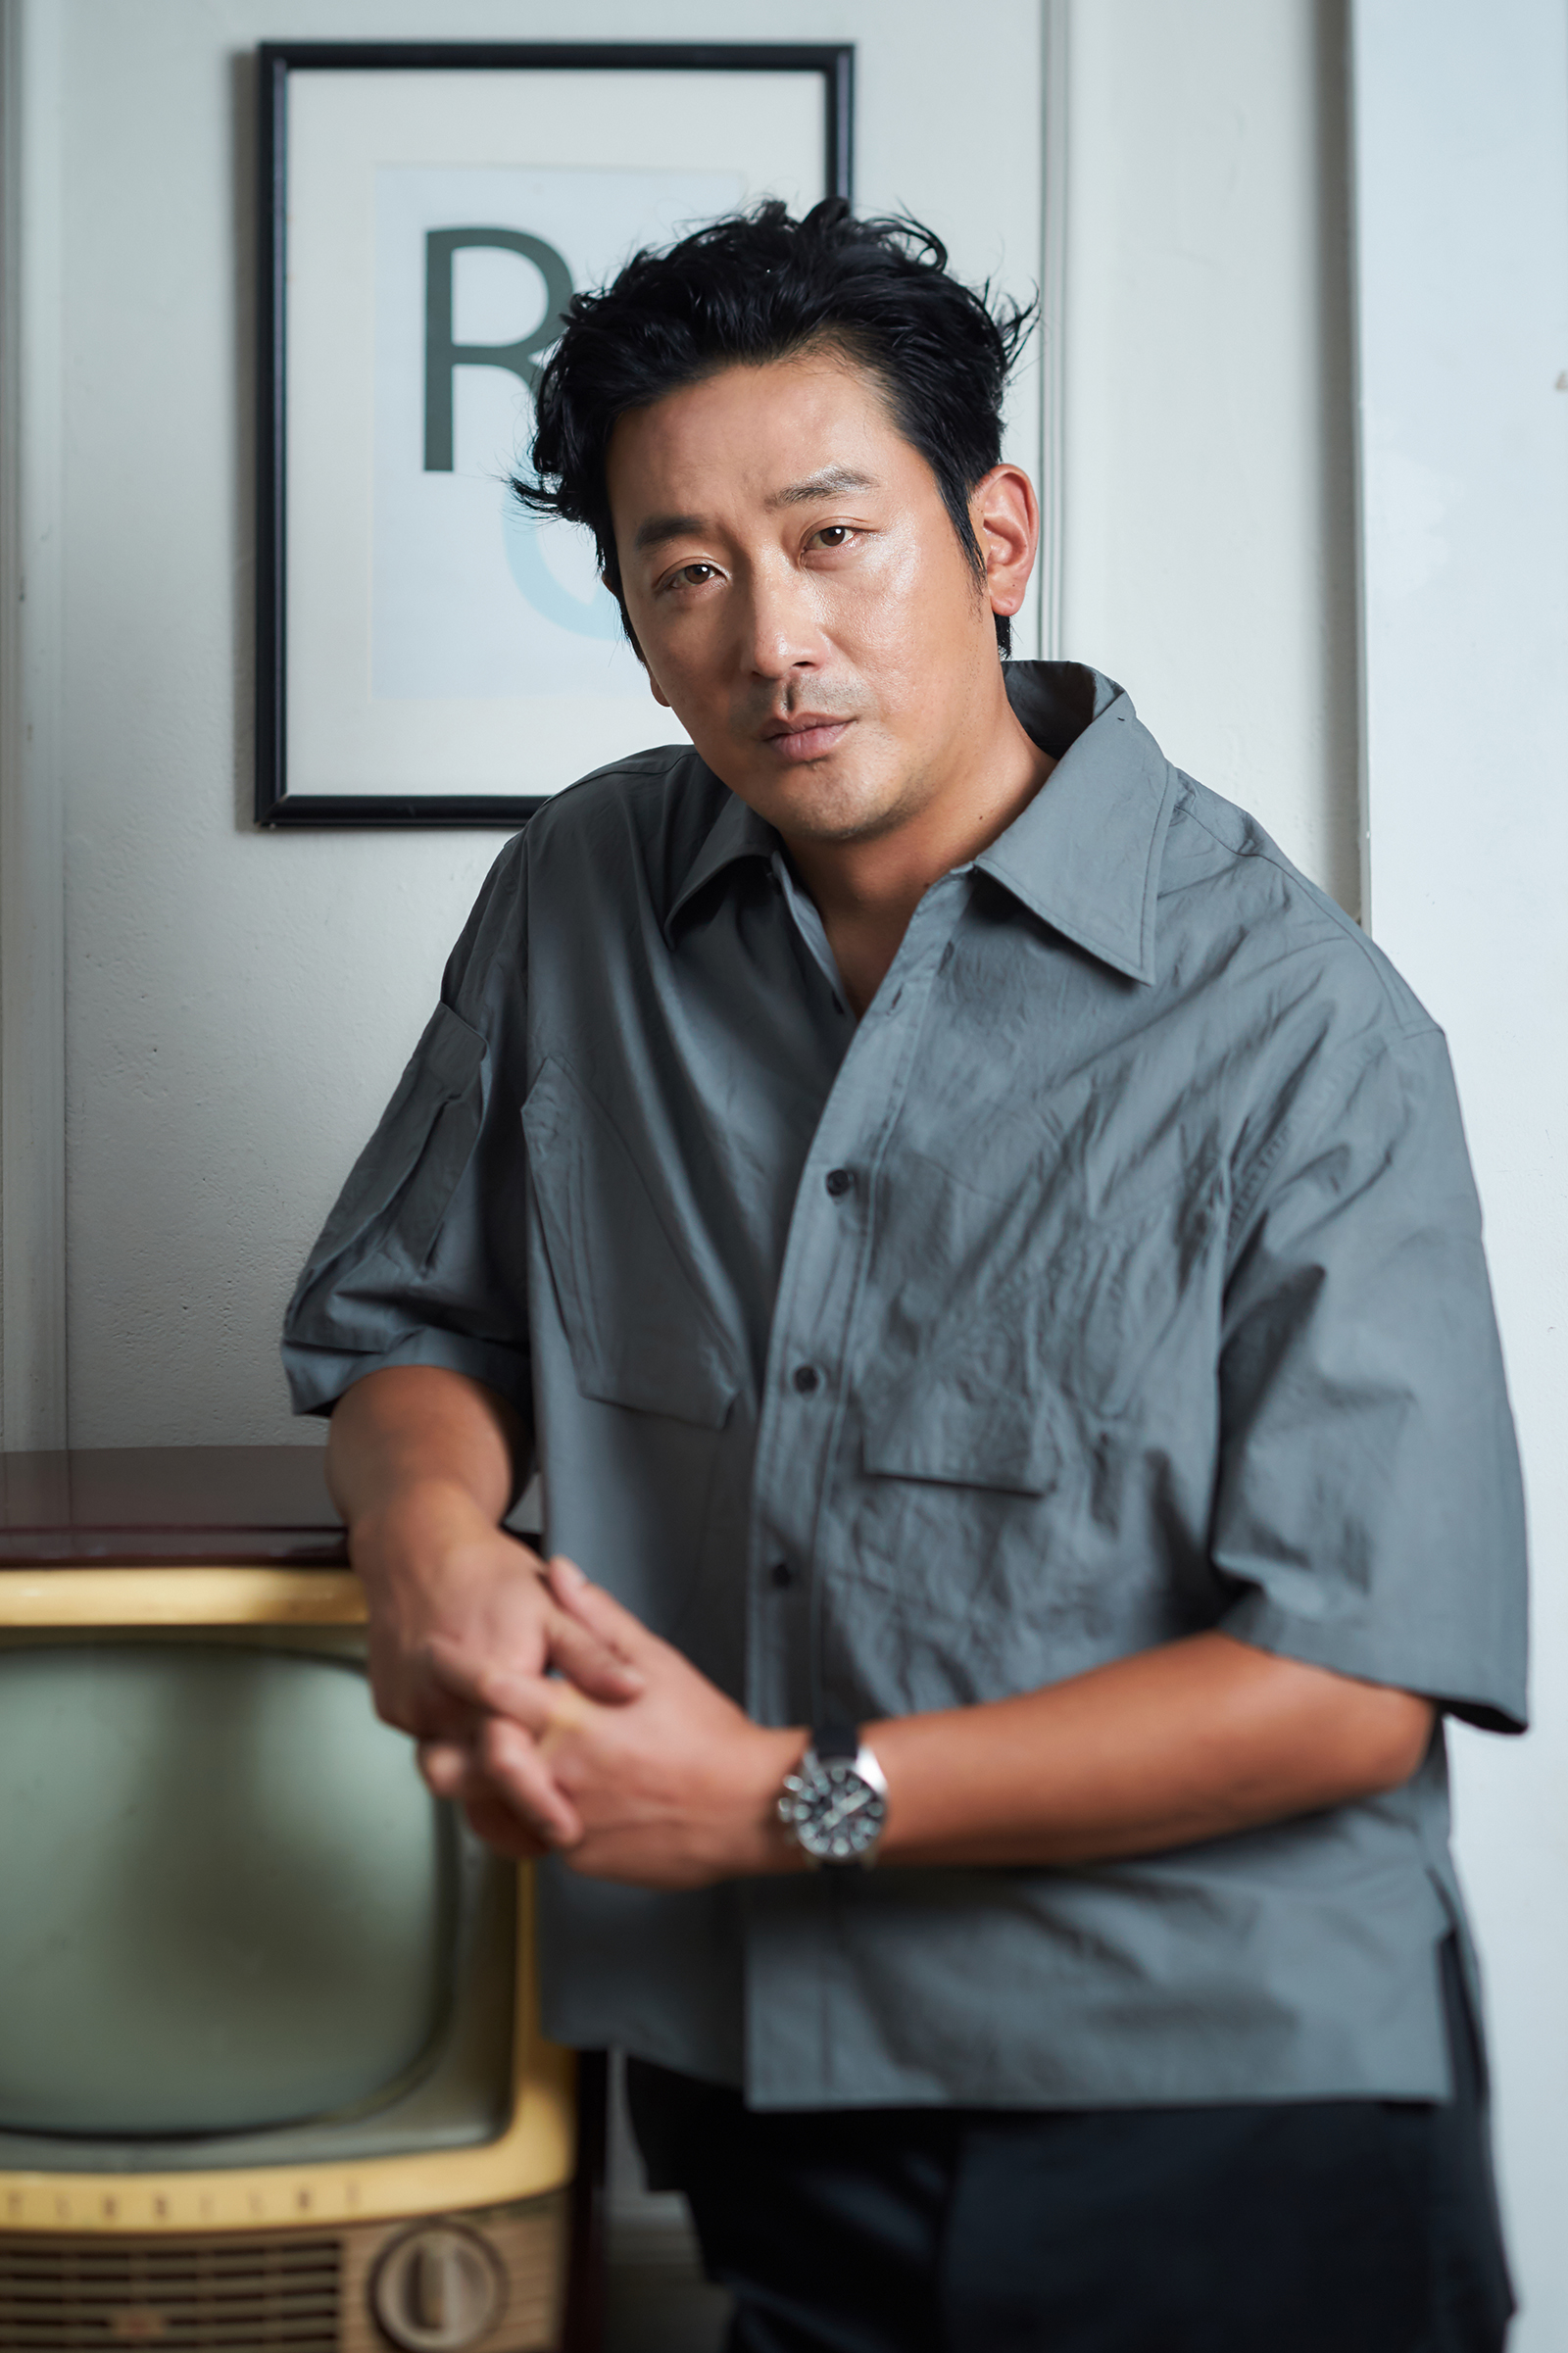 I met Ha Jung-woo, who is an actor, director and painter.To tell the story of the movie Along with the Gods: The Two Worlds: A Causal kite, which is due to open on August 1.Ha Jung-woo, who was blackened, gave his story first with a voice tone like a story with a motivated expression that could talk to anyone all day long and a premise that I will tell you only, this is a secret.It was a fun story feast that went between seriousness and jokes, but it seemed to be the charm of Ha Jung-woo that was not bad for some reason.A. Nice to meet you. Have you been on vacation?Q. Oh, not yet.A. Ive already been there. I played Ha Jung-woo SEK at the Florence Film Festival last March.Although it was a little early, it was the second Korean SEK game since Park Chan-wook, and 11 films were screened. I started in Europe on March 13 and went to Europe for about a month.Ive never been on a backpacking trip. Im so tired. Ive been in one place for a long time, but Ive moved for the first time.I lost my jumper, and there were many Korean tourists, so I was embarrassed. I shook my hand as I drove by and shouted Ha Jung-woo!Q. (laugh) Suddenly, Im introducing the current situation... Is it really good for your original fan service?A. If you feel bad according to the biorhythm of the day, stay still and shake your hand if you feel good.I didnt want to see Rome because I was bored and hated to go to sightseeing. I first stood in line.It was six months after the first half of the year, which was like a resting and sabbatical, and I have been preparing for the exhibition for six months and now I am doing a solo exhibition.Q. I had so much fun with the movie Along with the Gods: The Two Worlds: Causal kites, which also felt like a completely different movie from the first part.Q. I think I was confident about Part 2 and I was so excited about Part 2 that I was already expecting the next series.A. I did not talk about anything specifically, but is there something in the coachs mind?I have leaned a lot on Kahaani of the original webtoon, and from then on, I think that the director will be more free in that sense, perhaps we should make something new that is not in the webtoon Kahaani.Q. I heard you almost cast as the first part of the magenta character in the first place.A. Jahong is thought to be more suited to Cha Tae-hyun than I am, and in the scenario, he was impressed by the appearance of a thousand years ago in the second part of Kanglim.I had a relationship with the third company, and I thought I was a three-dimensional figure. I think I was more attracted to it.Q. It seems that there will be expectations and burdens for the second part of the box office because the first part is loved by so many audiences.If the second part is more than 10 million viewers, it will set the first record of 20 million in one series.A. Part 1 success is a bigger burden. Part 1 is a big love, so I thought I would not feel sick.I felt strange that I did not know whether this was tension or not in front of the opening of the second part.I met with Yong-hwa Kim, Ju Ji-hoon, and Lee Jung-jae and concluded that I was so nervous in the first part that I am not feeling much now.I cant predict anything commercial. I dont know the taste of the audience. Im sure its a lot more cinematic than two.I dont talk about the score in advance because I have a jinx. No kidding. Ill know next weekend.Q. Then you wont make any promises.A. Ive cut my pledge. If the movie goes well, I think we should do it at the corporate level, whether we make a foundation at Lotte Mart Entertainment or Dexter. (Laughs)Q. Most of them were graphically processed, and other performers said that it was difficult to process or act on the green mat. What was the hardest scene?A. The most embarrassing scene was the dinosaur scene.I draw a circle on the floor with a knife, and about 100 staffs are looking at it. The scene of drawing a circle like a single ball on the floor is bitten and shot. Close your eyes, close your eyes!I have to do an ambassador that I do not usually write together, but the person who does it is very embarrassed.I do not usually do it. I checked if I could see what I was embarrassed in the movie.Q. Did you think that this movie should not sin anything?A. When I pray, I always say, Forgive me for knowing, for not knowing, for not knowing, for not knowing. I must have been guilty of not knowing, (and again in serious mode) and I think that as I get older.Ive been thinking a lot about people, not just caring. So Im careful when I talk. Im thinking about him.The way we live together as we age, the reality, the gap, and ten years ago, if we had lived without knowing it, wed be different now.Q. I have a deep connection with the director of the movie Peaowl which is released at the same time.A. Every time you open, movies are crowded, and will Illang: The Wolf Brigade go well? Will Peaowl go well?A lot of people wonder if Along with the Gods: The Two Worlds will work out?But they were always so careful because they were colleagues and people to meet again.My next piece is with Yoon Jong-bin. I still see him five to six days a week. Lets go.Illang: The Wolf Brigade is the same agency, so I often see it. I have just been to the Illang: The Wolf Brigade and I will go to the Peafowl.In the past, I thought it would help me not to go to the other movie, but it changed to go to celebrate, enjoy and fight together.Originally, Peaowl was supposed to appear in SEK, but it was not happening because it was shooting the historical drama of Along with the Gods: The Two Worlds at the time.Q. What does the film Along with the Gods: The Two Worlds mean for Ha Jung-woo?A. It is my first series work, a challenge to a new genre, a new type of YG Entertainment, and a first step to expand not only the domestic market but also the market.I think this is all right. I thought the CG technology of the Korean movie Mr. Go was meaningful.Because there was Mr Go, Along with the Gods: The Two Worlds could be YG Entertainment and made.I watched Yong-hwa Kim next to him and wondered about the future of the movie maker Yong-hwa Kim and making a movie with his own appearance honestly.There is a great expectation that a new chapter will begin.I am personally grateful and fortunate that this new movie was loved, and I am proud that I was among them that Korean movies presented good things to go out to the world.We also think that if we make such a movie as Marvel or Pixar, we will develop into a big industry that is not as big as Hollywood.Maybe the genre was limited and similar Actor, similar story, similar form of color, and the opportunity to expand and expand the gap Along with the Gods: The Two Worlds created.I think more writers and directors can unfold their wide imagination without limits.Q. Do you have any works that you are preparing as a director?A. The work that is being composed already comes out next week, and I started working with the writer from the end of last year. The first draft was written by the artist and I will develop the scenario from next week.Its a caper, a work with Ha Jung-woo comedy, and the media is the background. Its not a serious and serious story like the movie Sport Light.Q. I think its strong.A. I have momentum. Im going to be working on anything. I have to shoot three works by the end of next year, so Ill have to schedule my work after the end of next year.Q. Are you planning to make an appearance in the movie as well?A. Im about to appear in less than 10 episodes with a feel-good supporting role. (Laughs)Q. What was the driving force behind this hard work?A. I love milk-sysel and bee-trees. (Laughing) I was stressed because I was working on it. I spent the first half of the year working on paintings and traveling, but it was harder than when I was filming.I cant sense how drawing itself affects me. Of course, its a good thing, but it doesnt help me.Someday, these series of lives will come out of any impact. Filming is the funniest thing. Directing, acting, shooting.I want to do something if it doesnt work, but I wake up at dawn, but its a movie that works again. Fortunately, its fun and Im so grateful that it fits me.If you lose interest, fun, you wont shoot a movie.Q. What makes Ha Jung-woo happy these days?Q. What is the goal of Actor Ha Jung-woo?A. The goal is to be a better work, better acting, and better actor, a measure and incalculable part, and it is constantly going on.iMBC Kim Kyung Hee  Photo Provision Lotte Mart Entertainment